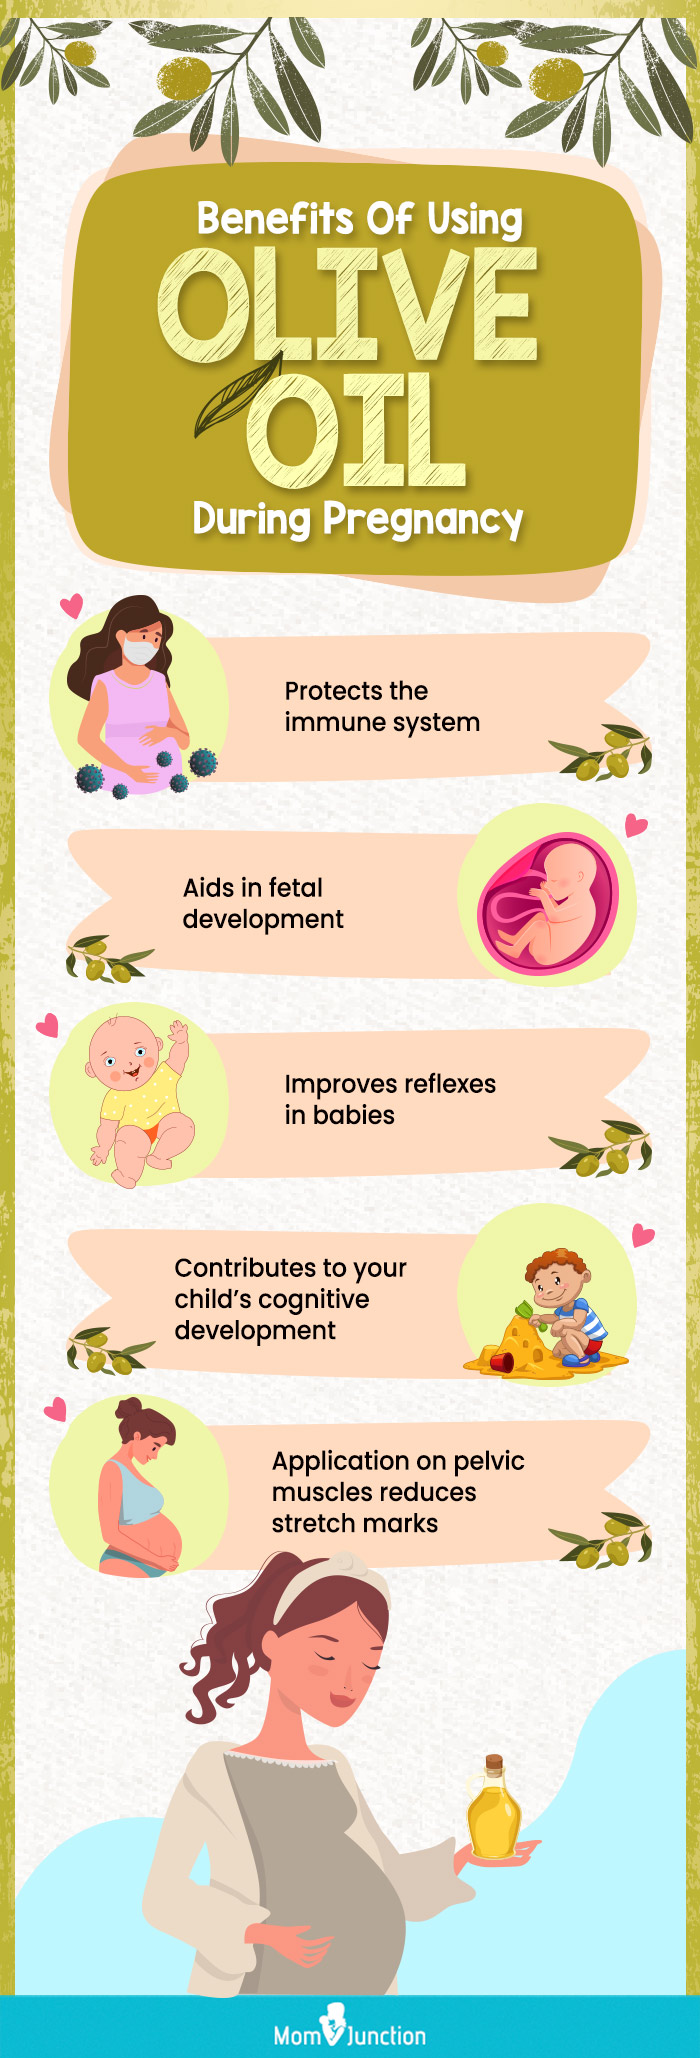 benefits of using olive oil during pregnancy (infographic)